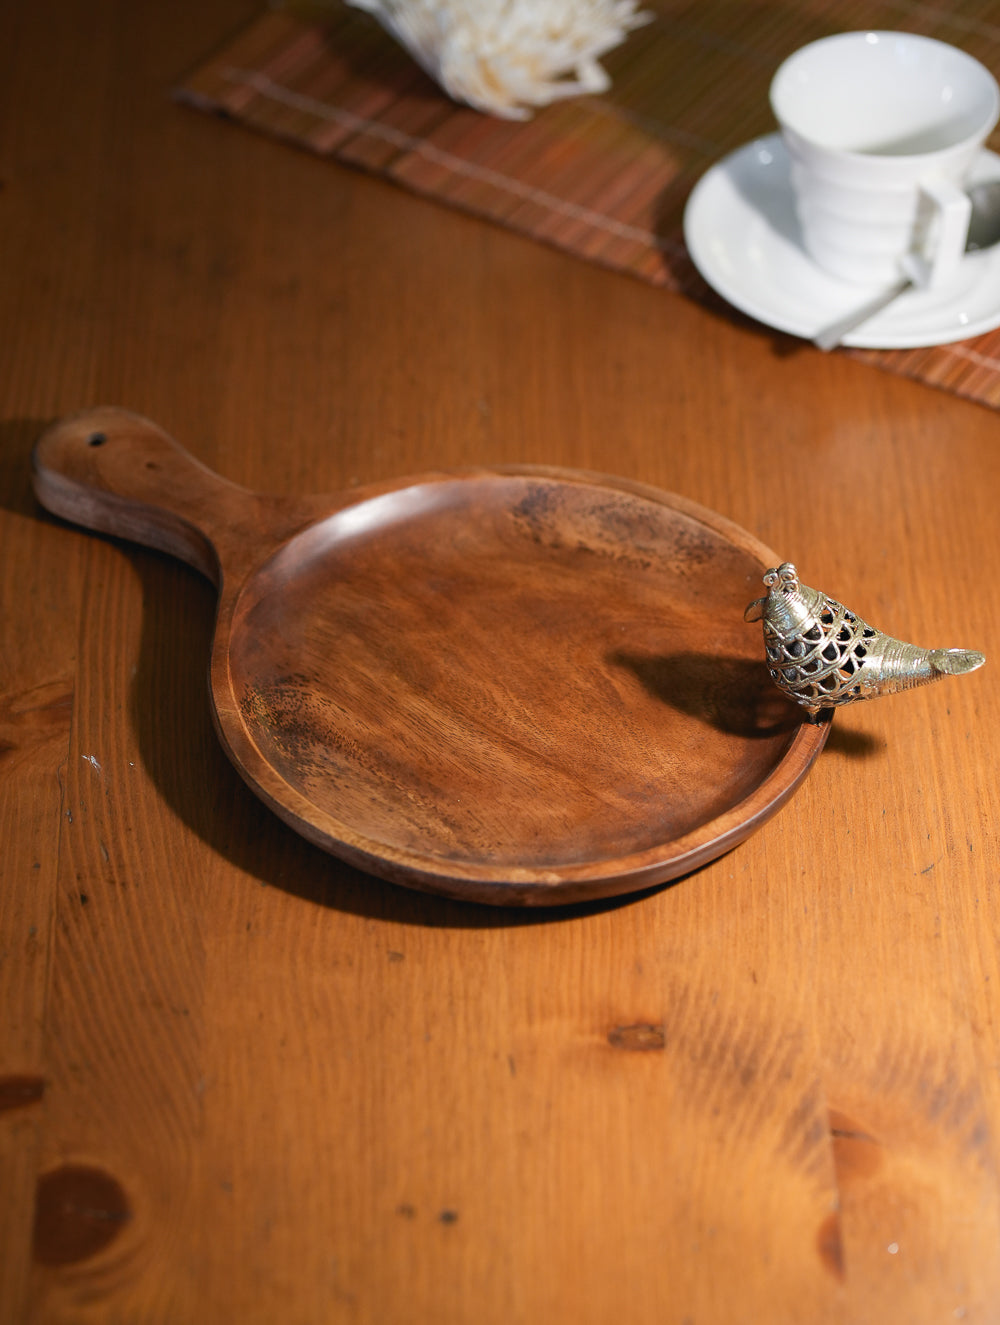 Load image into Gallery viewer, Wood &amp; Dhokra Craft Tray / Cheese Board with Dhokra Bird - Round